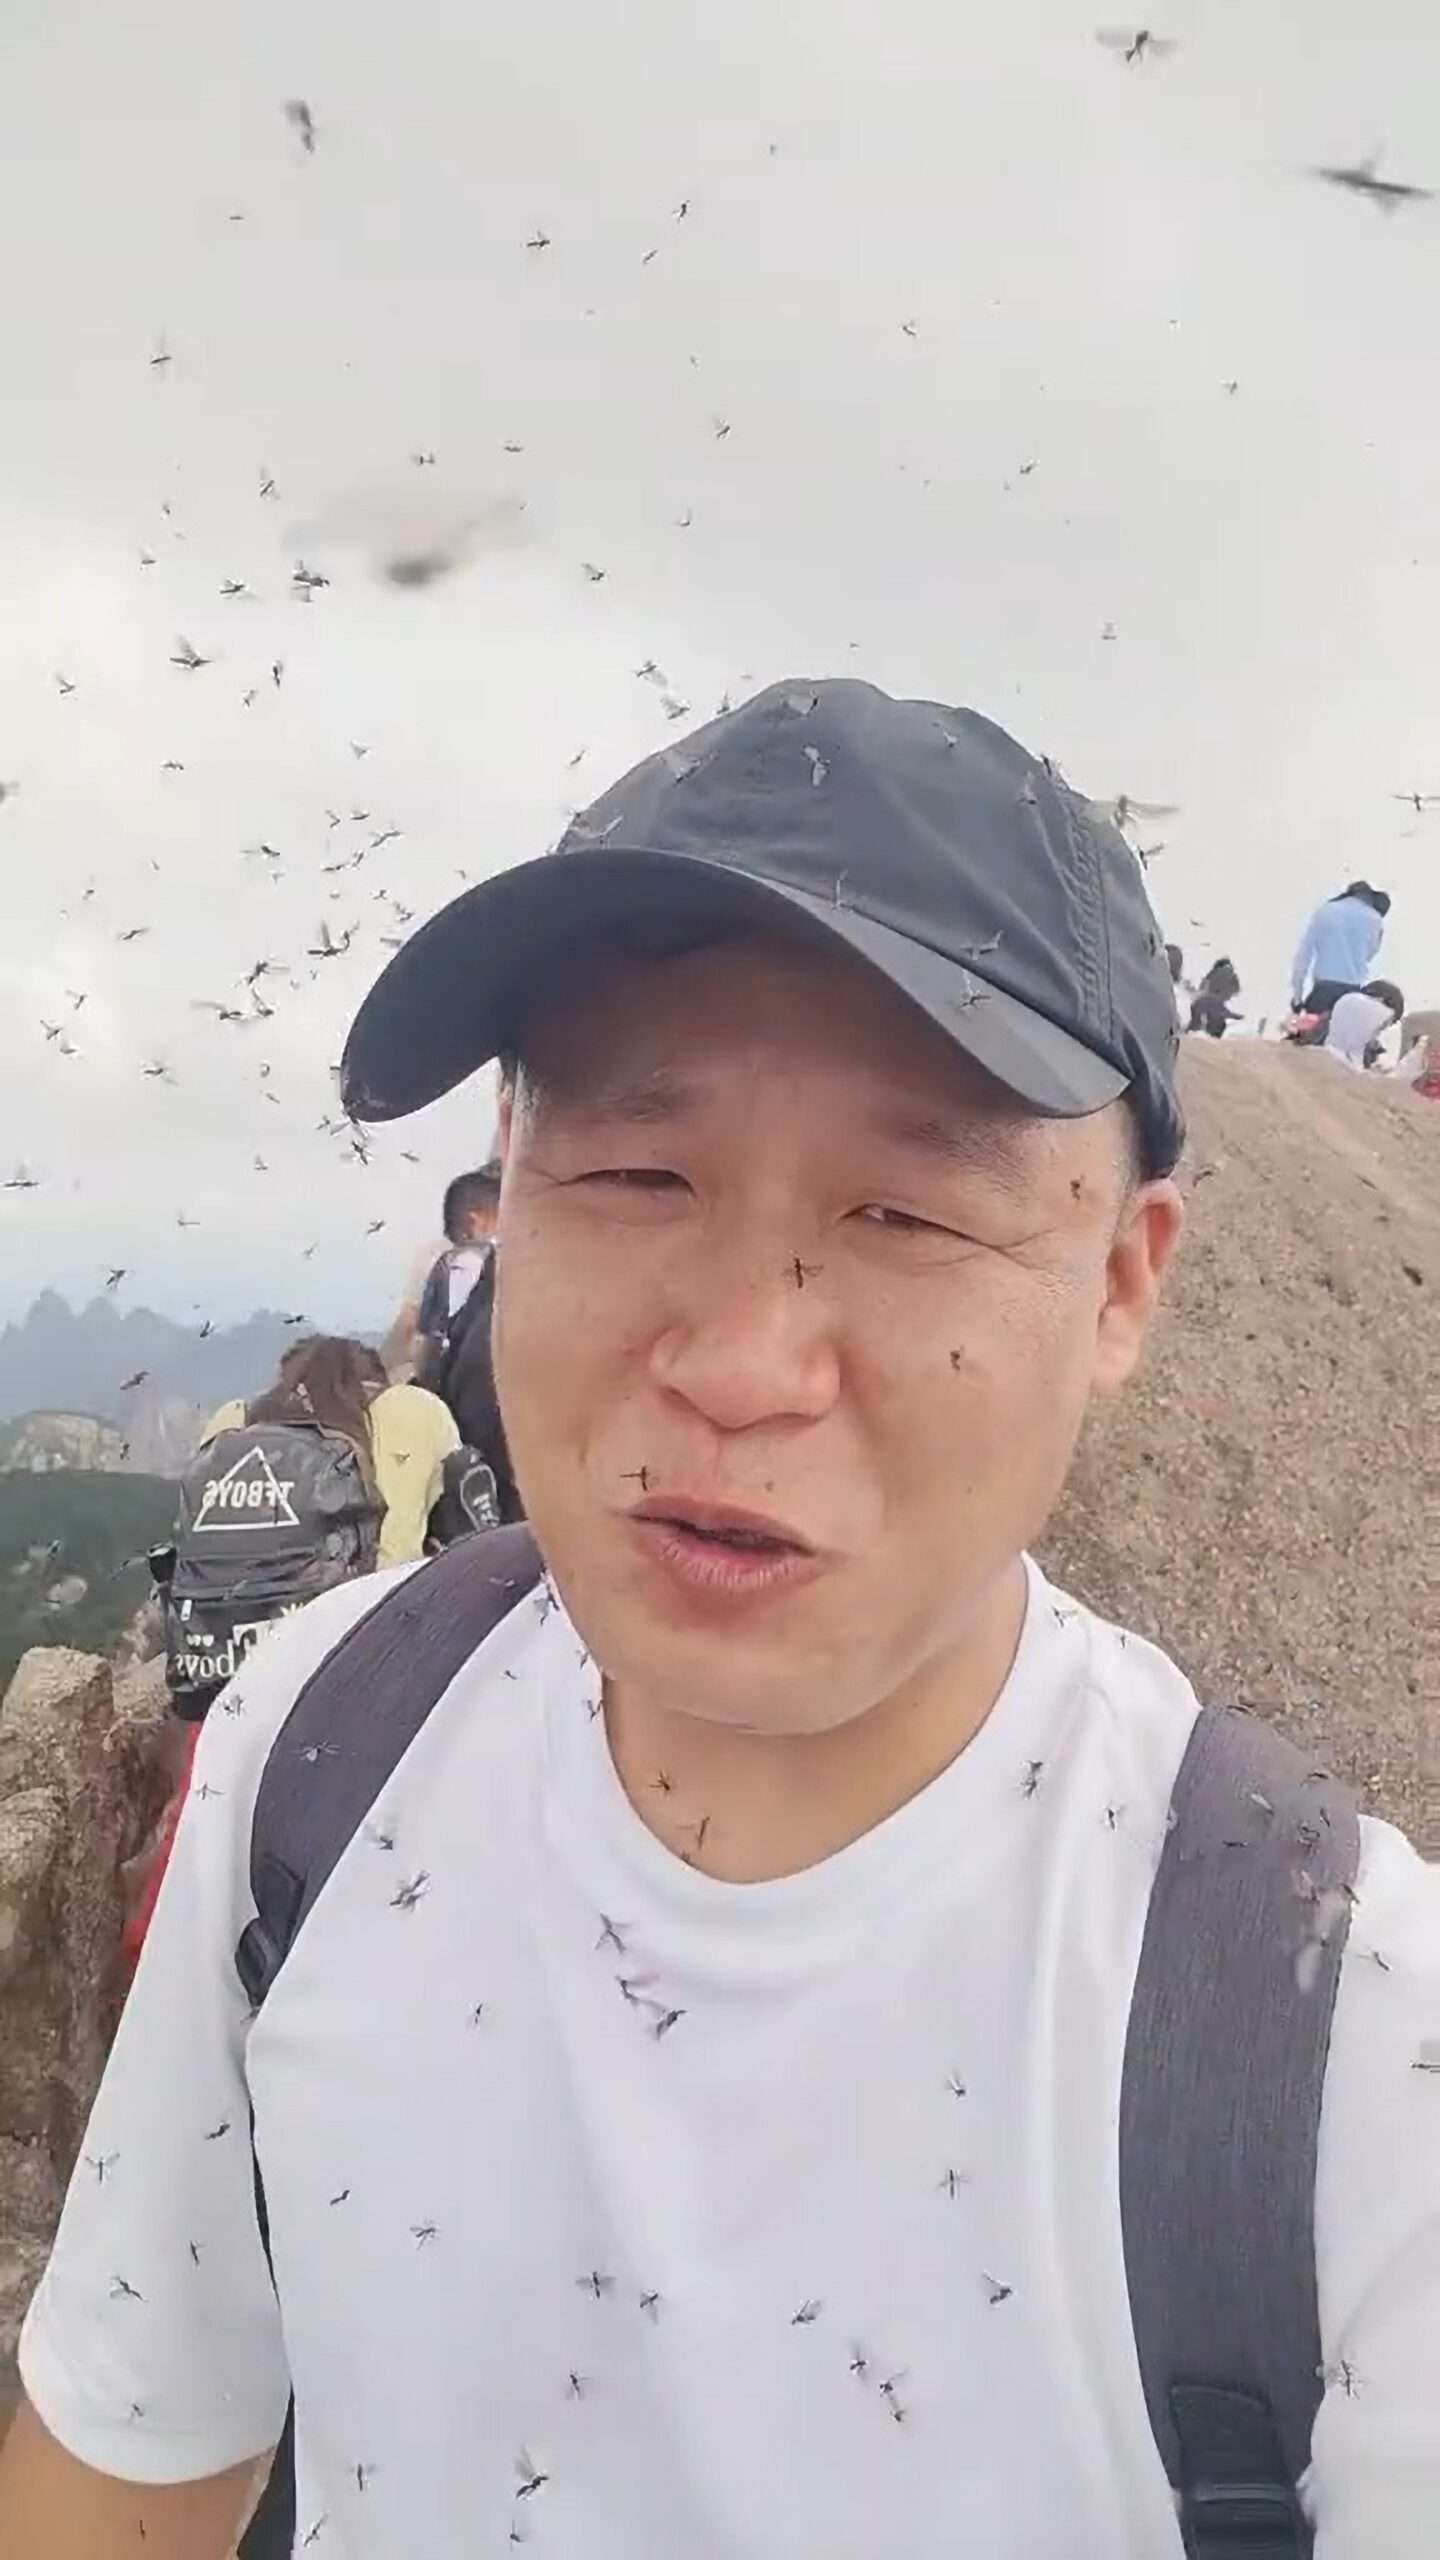 Read more about the article  Flying Ants Swarm Tourists At 6,000-Ft High Mountaintop